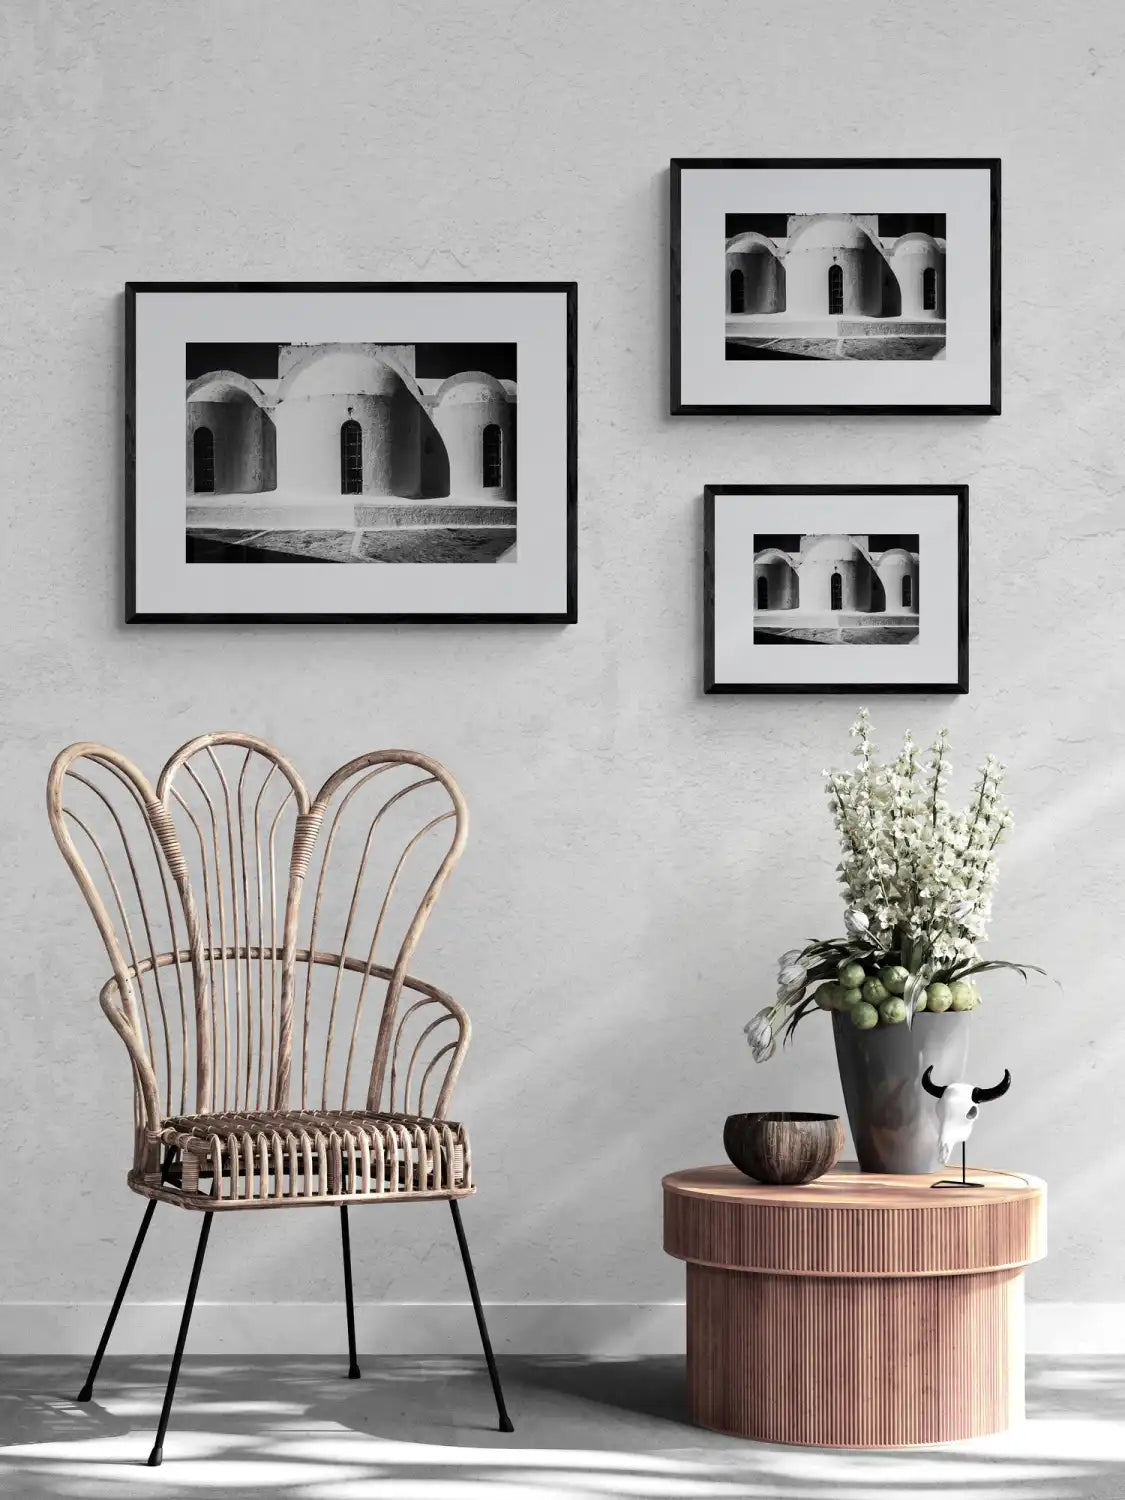 Local Church Forms | Santorini | Chorōs | Black-and-white wall art photography from Greece - framing options